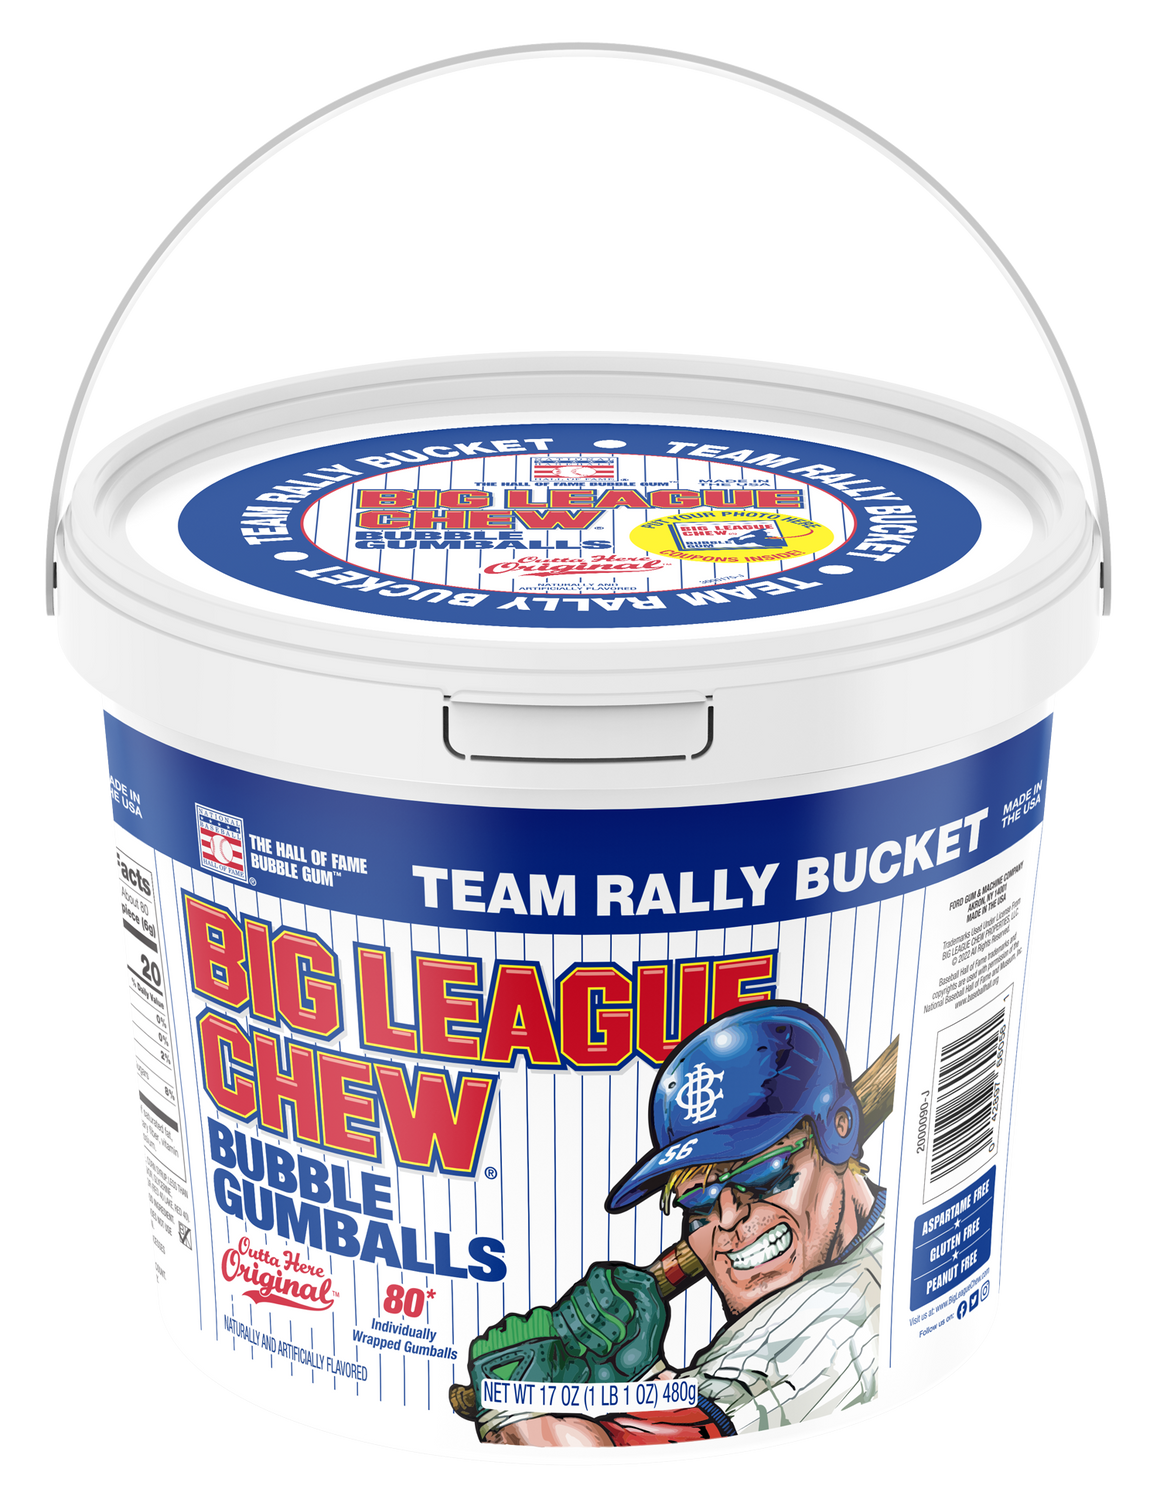 Big League Chew Bubble Gumballs 80 count Team Bucket - For fresh candy and great service, visit www.allcitycandy.com